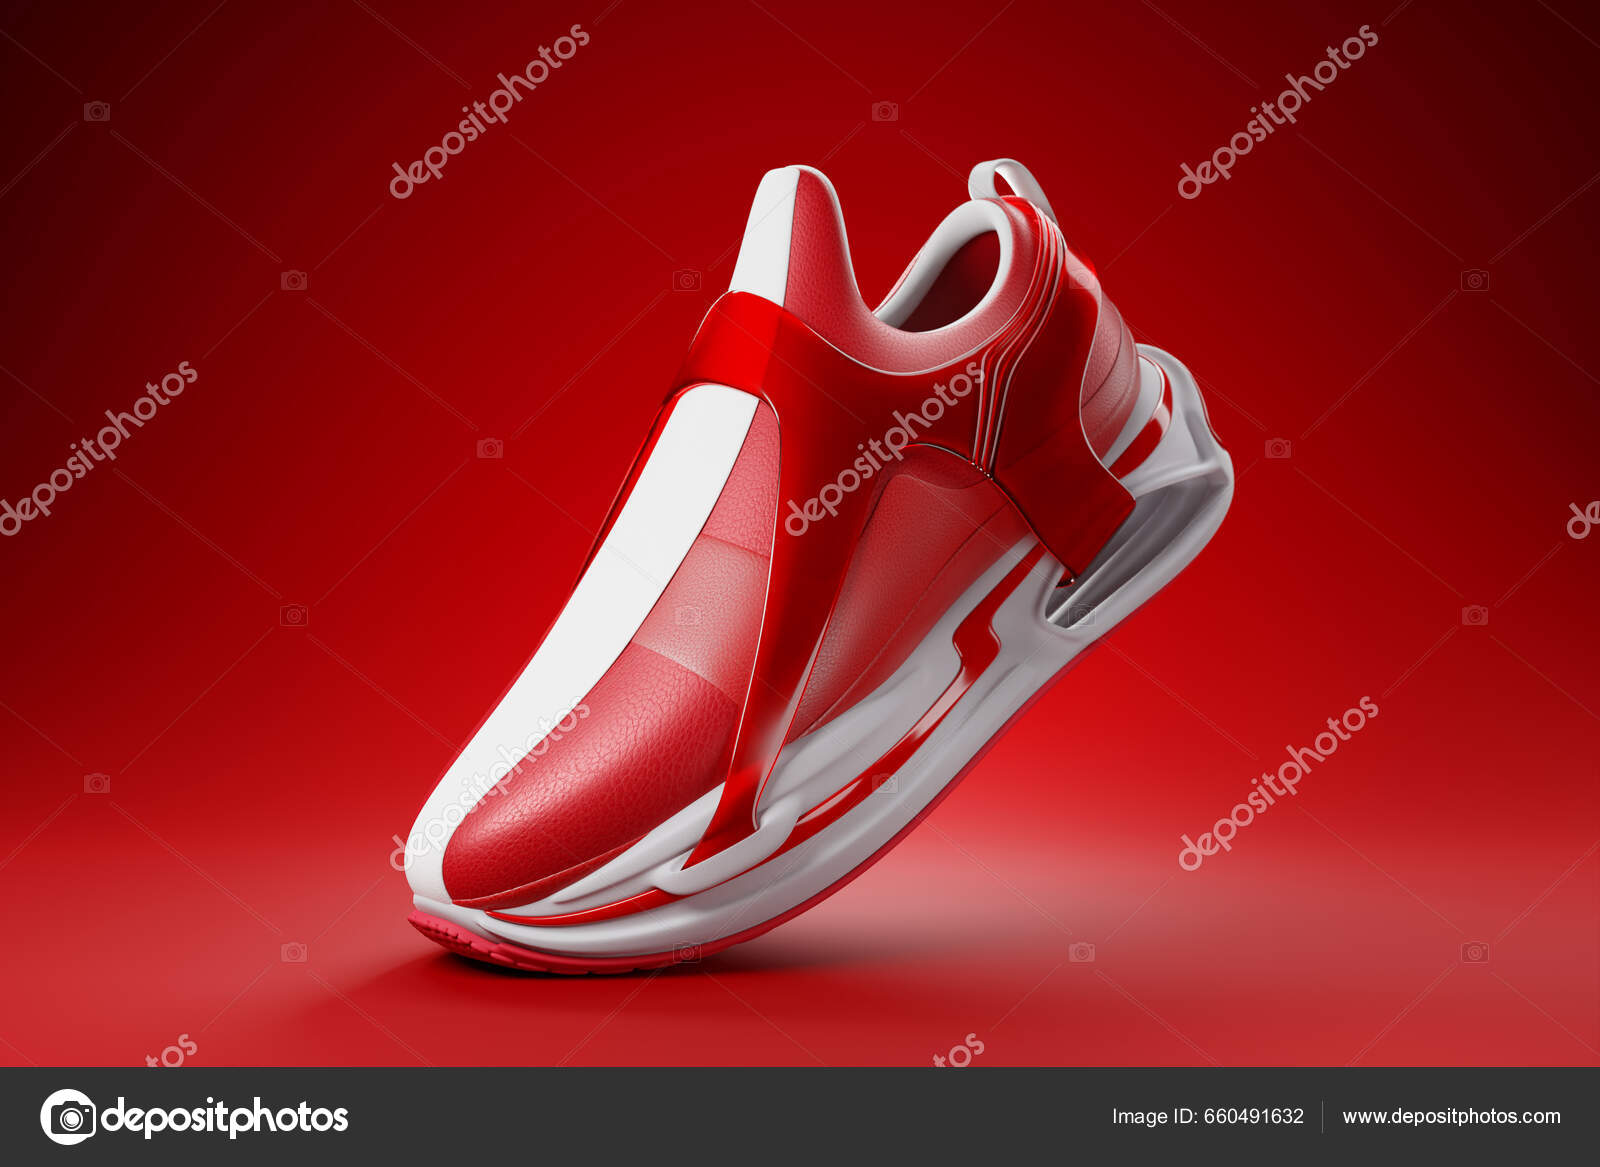 Premium Photo  Black women's shoes with red soles. 3d rendering  illustration.